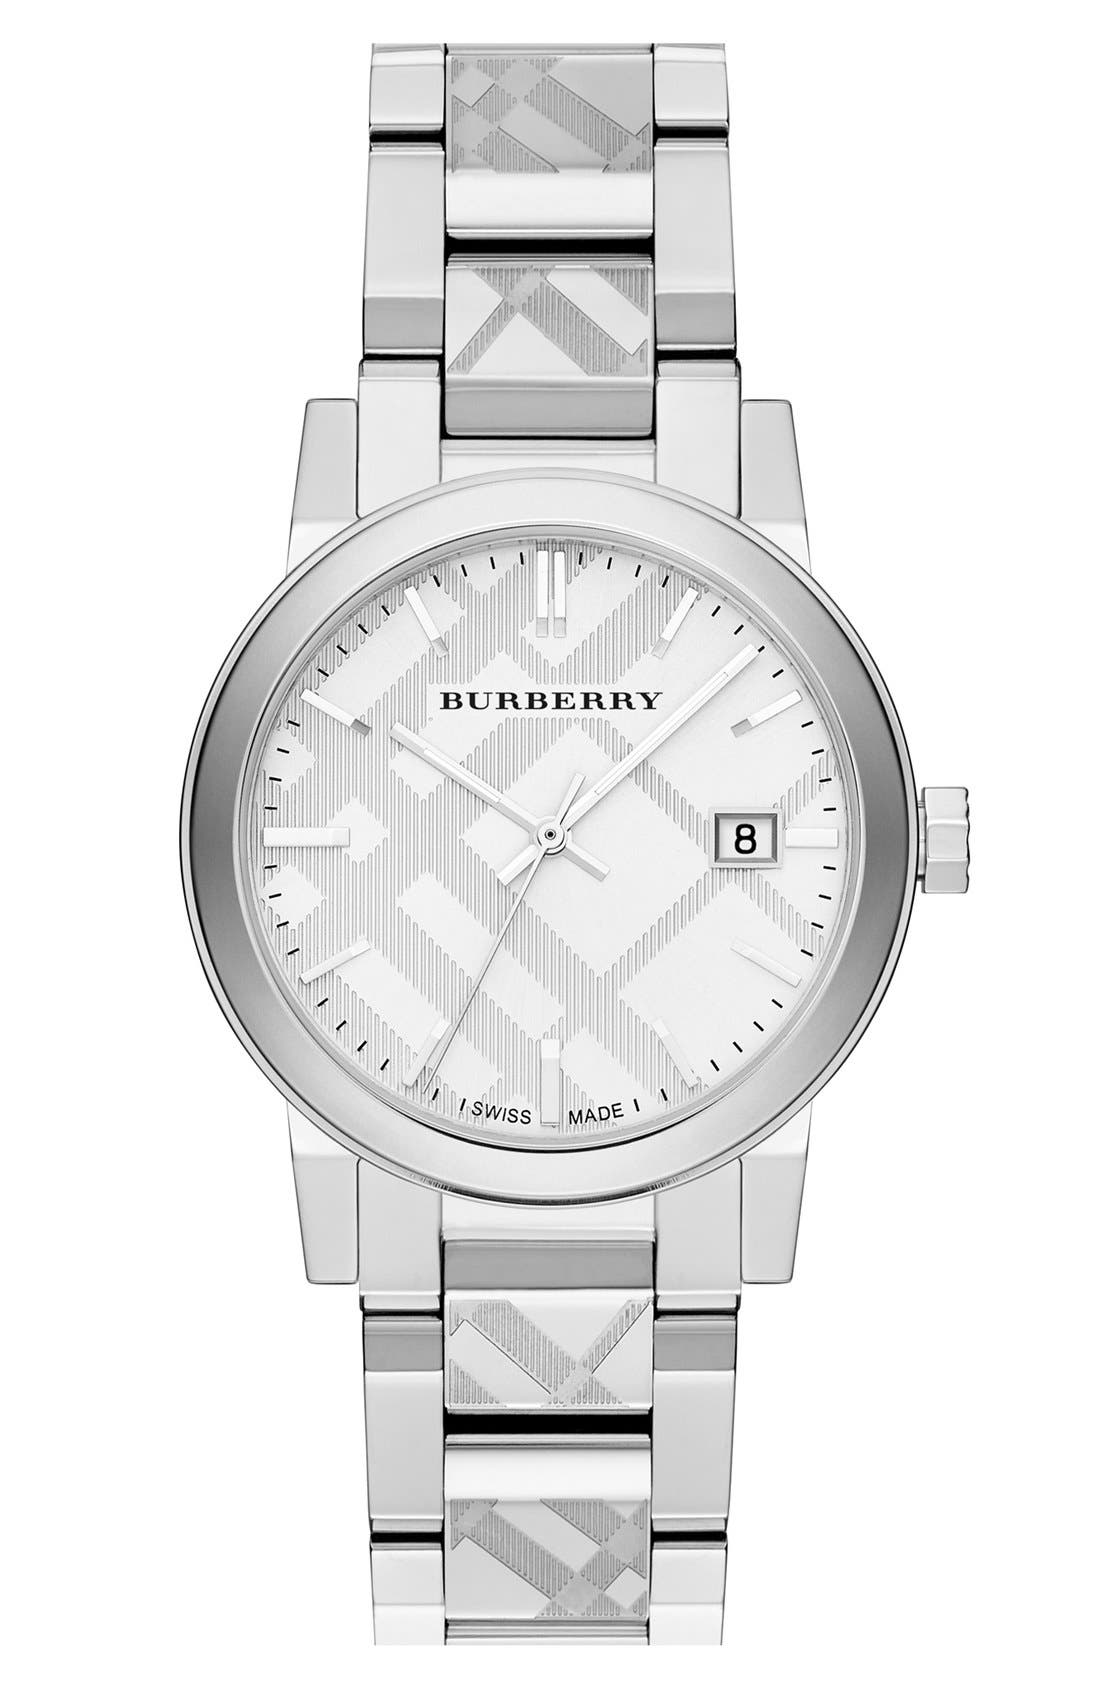 burberry checked stamp watch